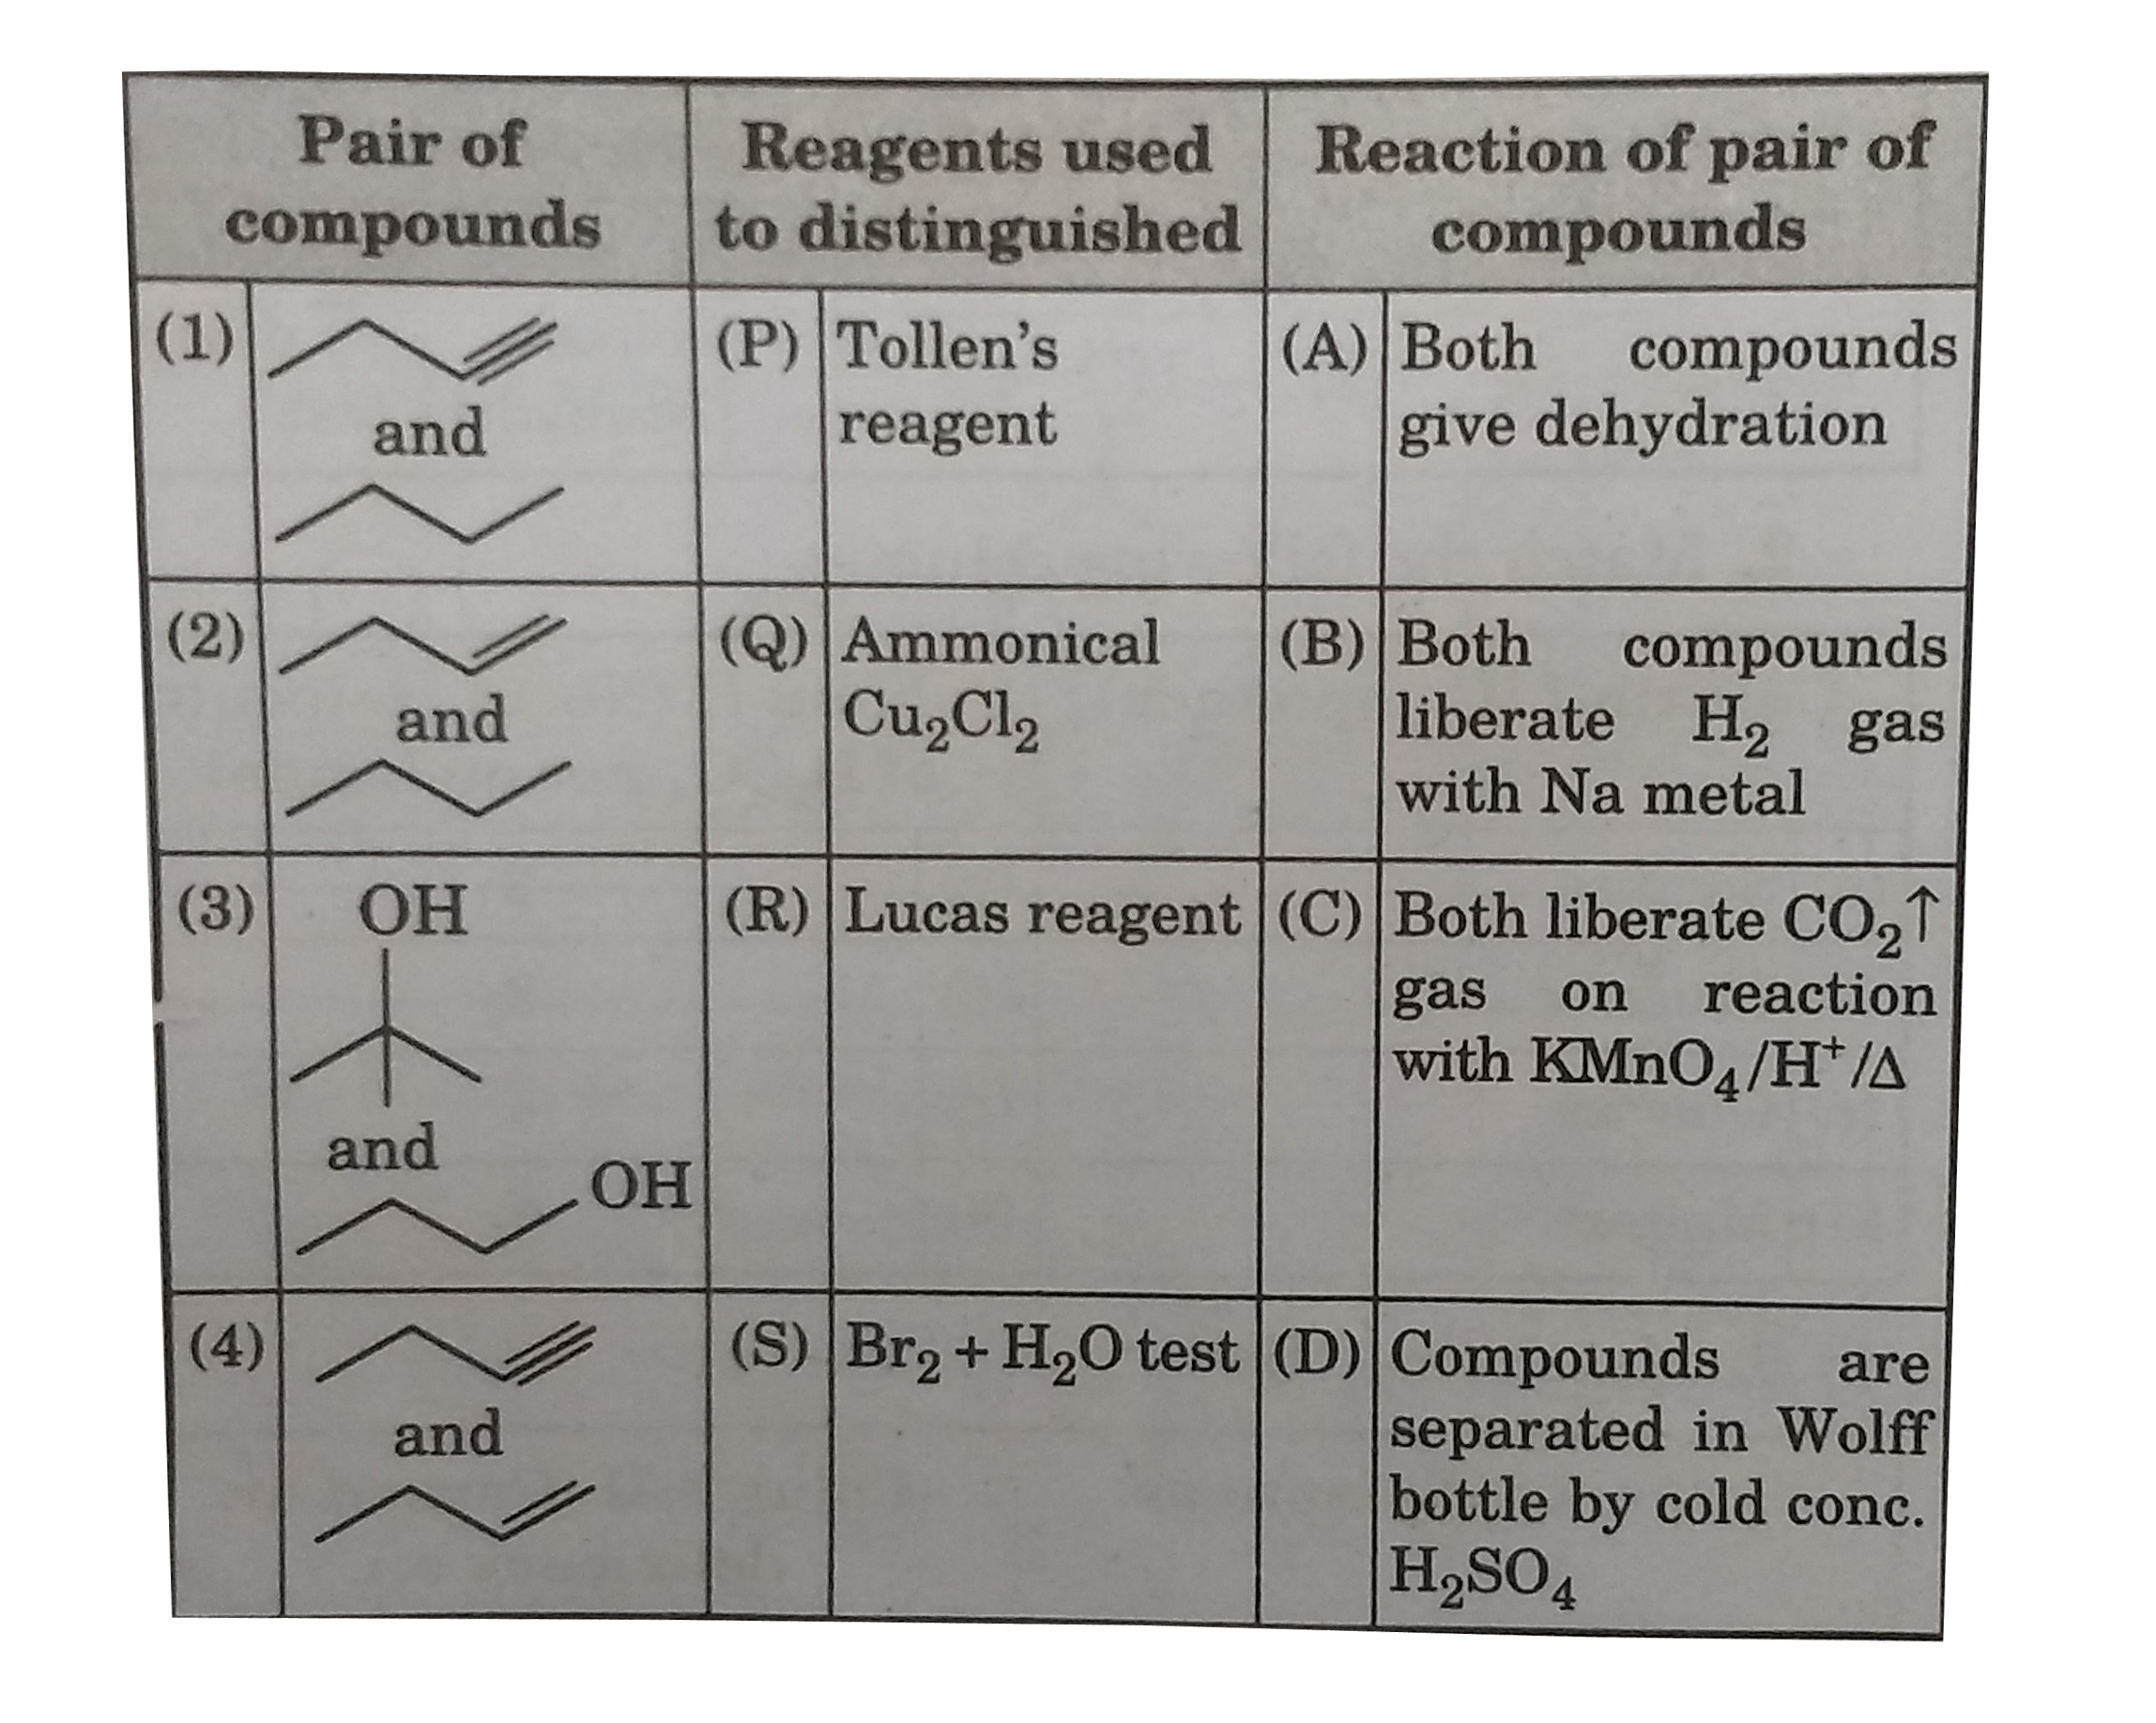 Identify correct set for 3nd pair of compounds ?